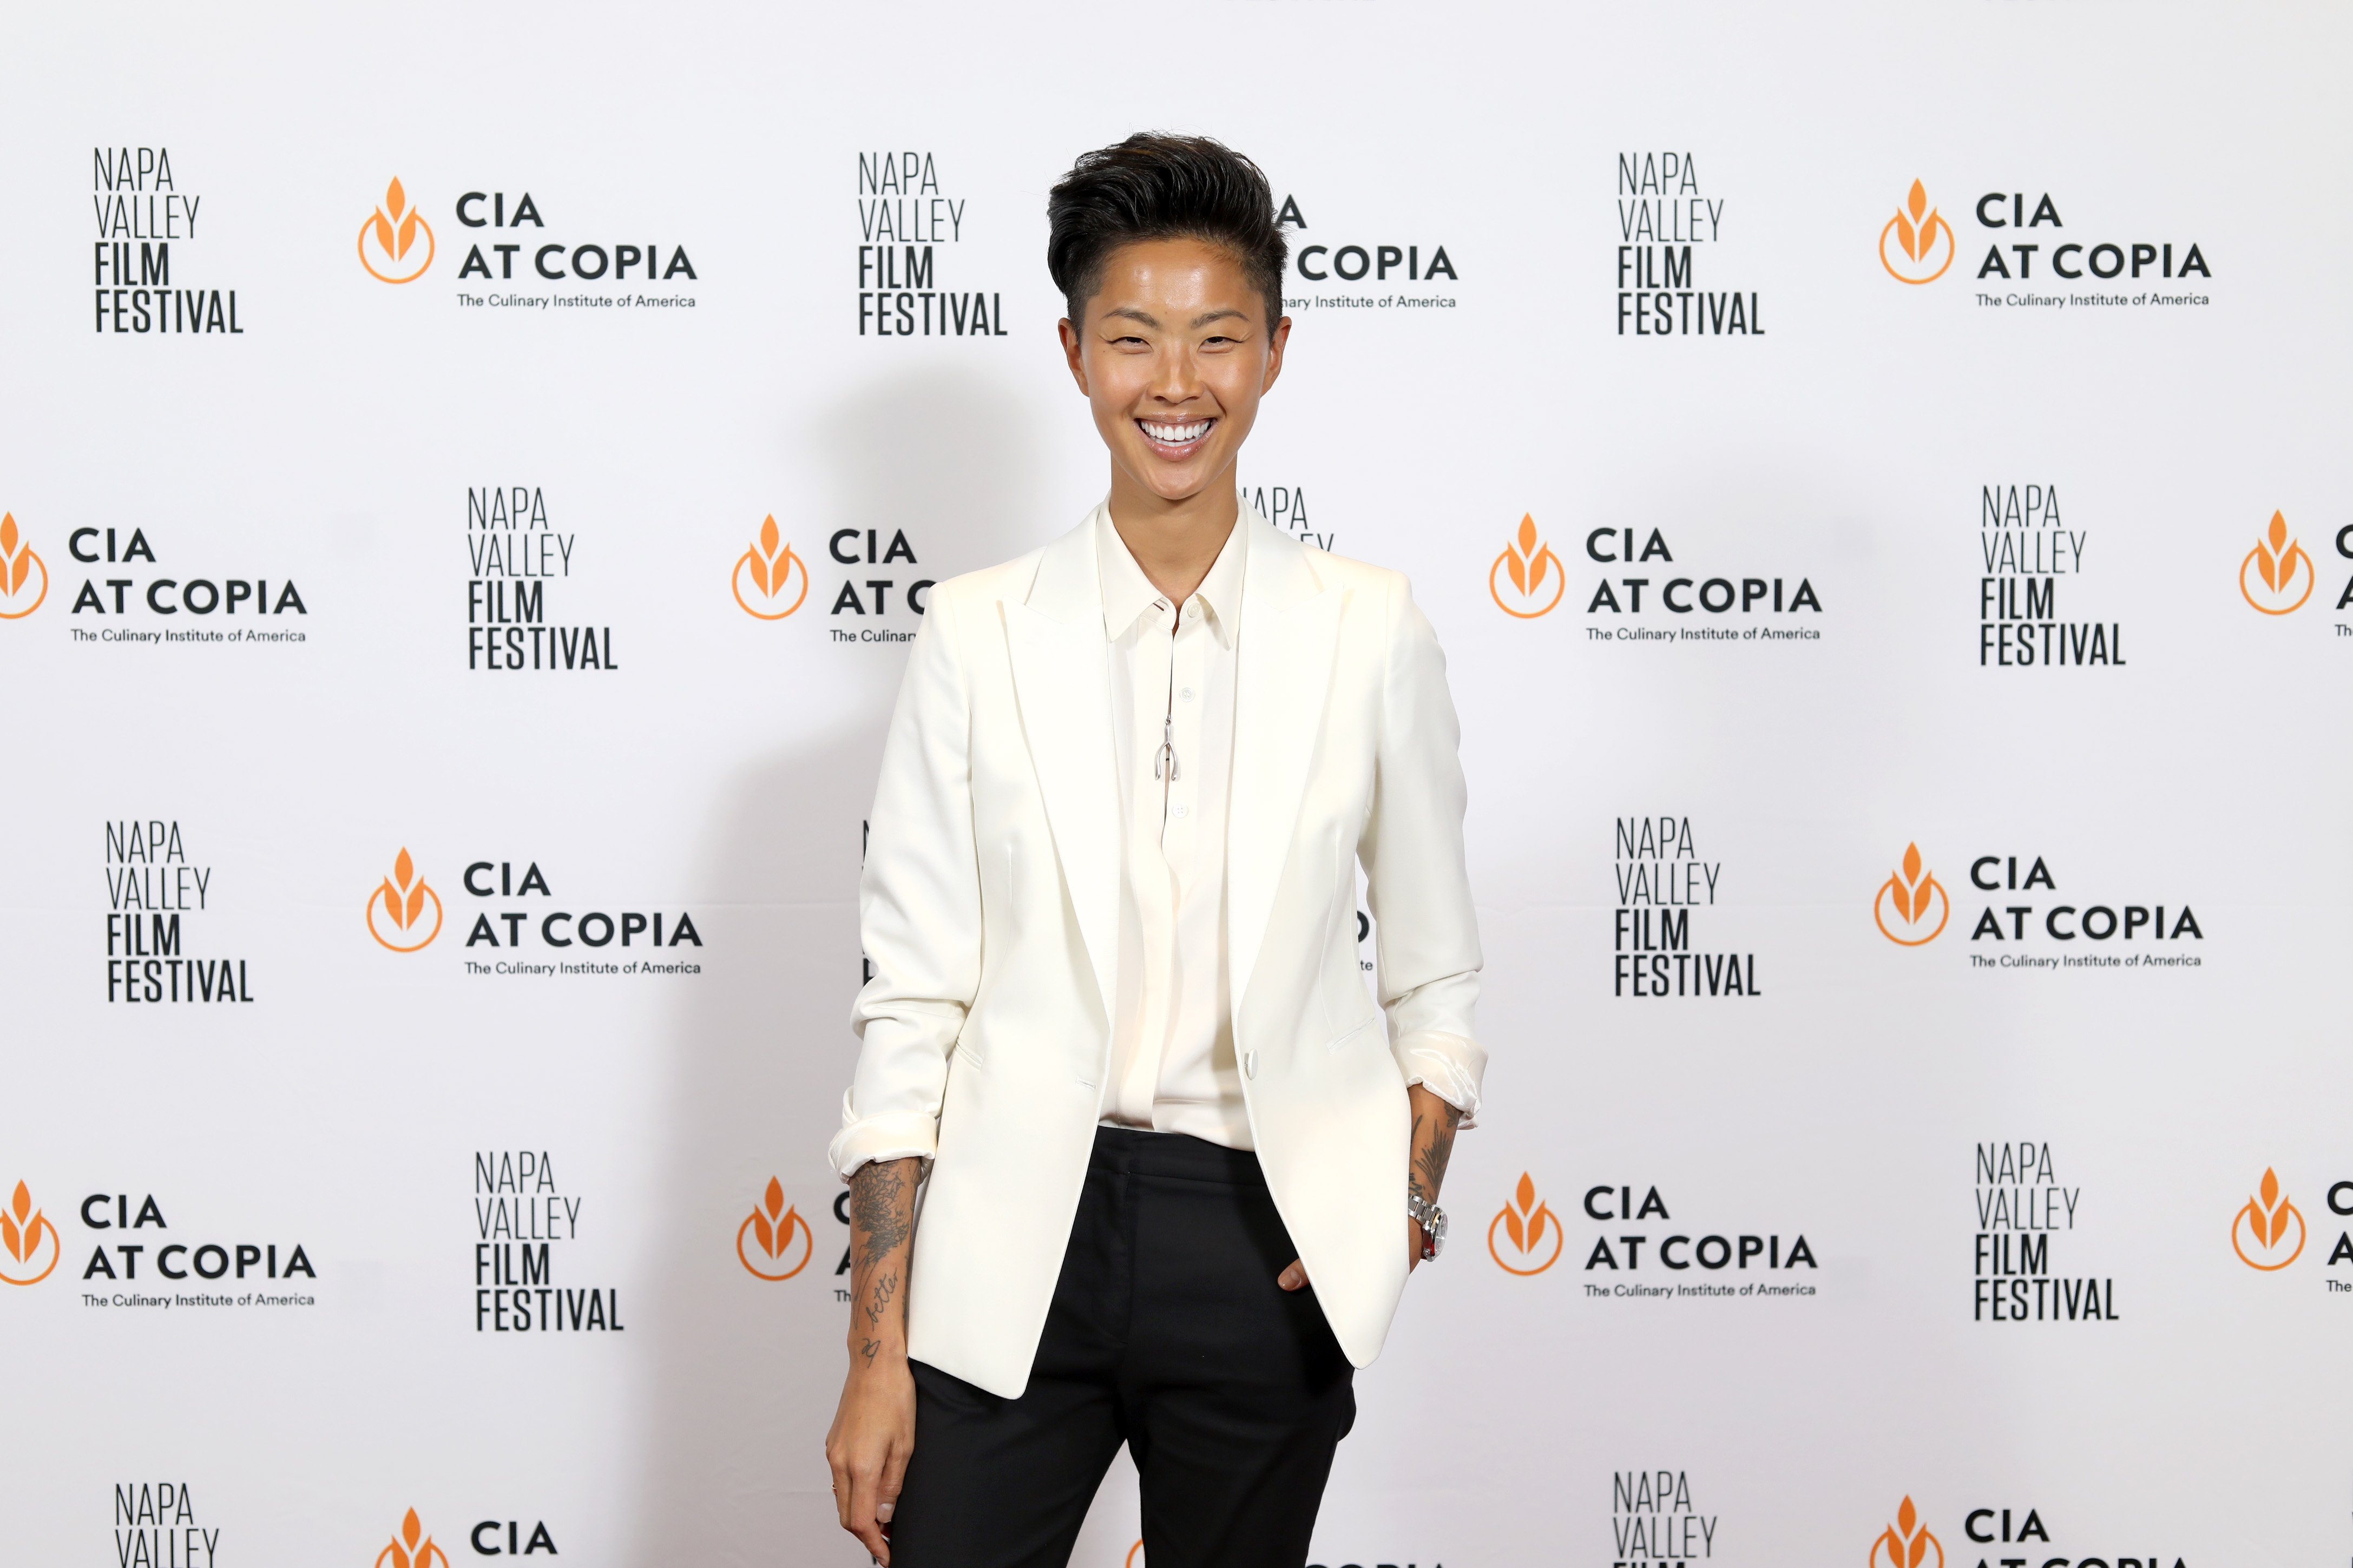 Co-host Kristen Kish attends a screening, Q&A and dinner for Netflix's Iron Chef: Quest for an Iron Legend hosted by Napa Valley Film Festival and the Culinary Institute of America at Copia on June 15, 2022 in Napa, California. | Source: Getty Images